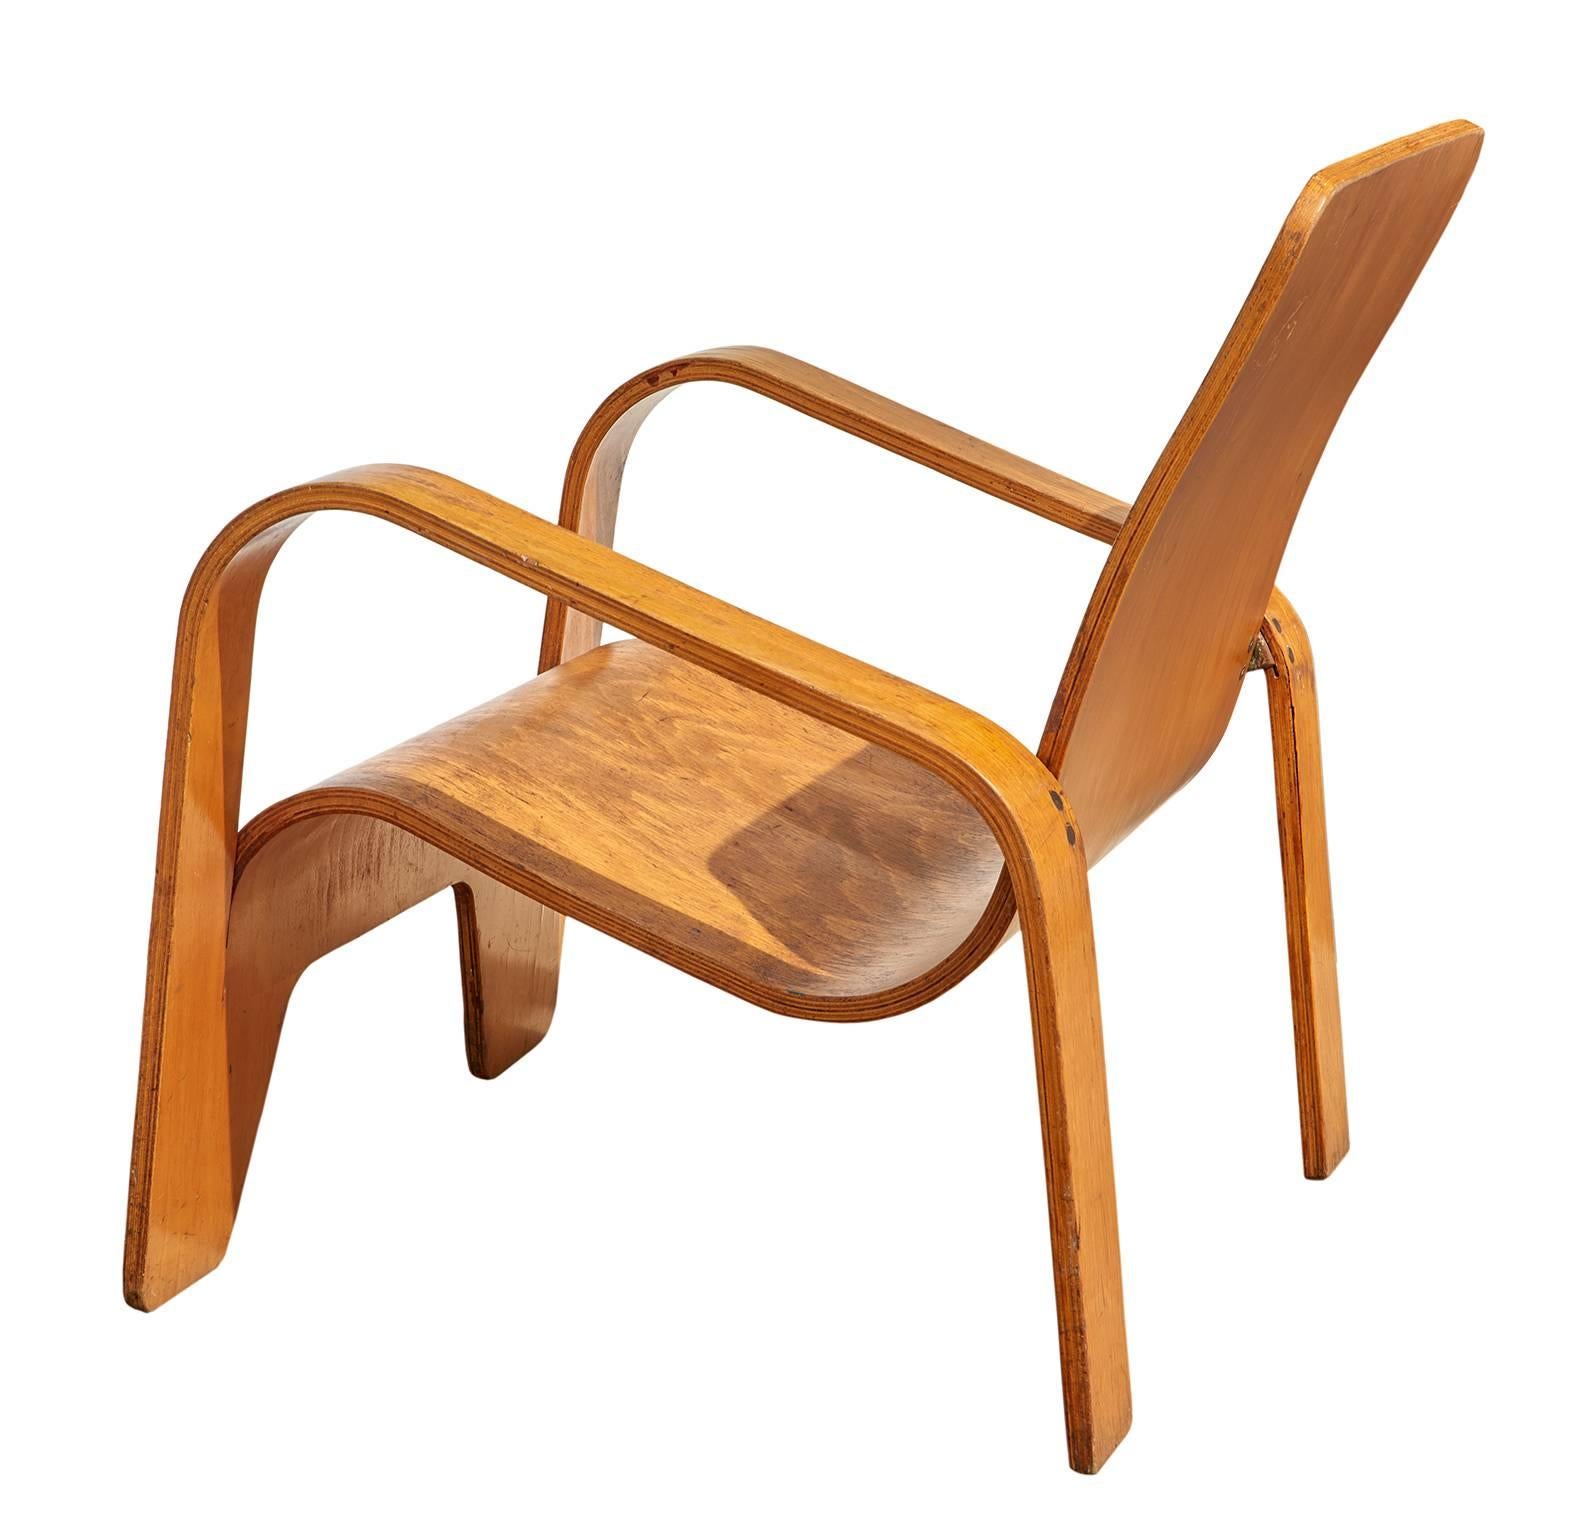 The Lawo chair, so named because it was made of LA-minated WO-od, was brilliantly constructed from a single sheet of birch plywood, which is cut and then bent in different planes to create the seating surfaces, arms, and legs of the chair. The rear